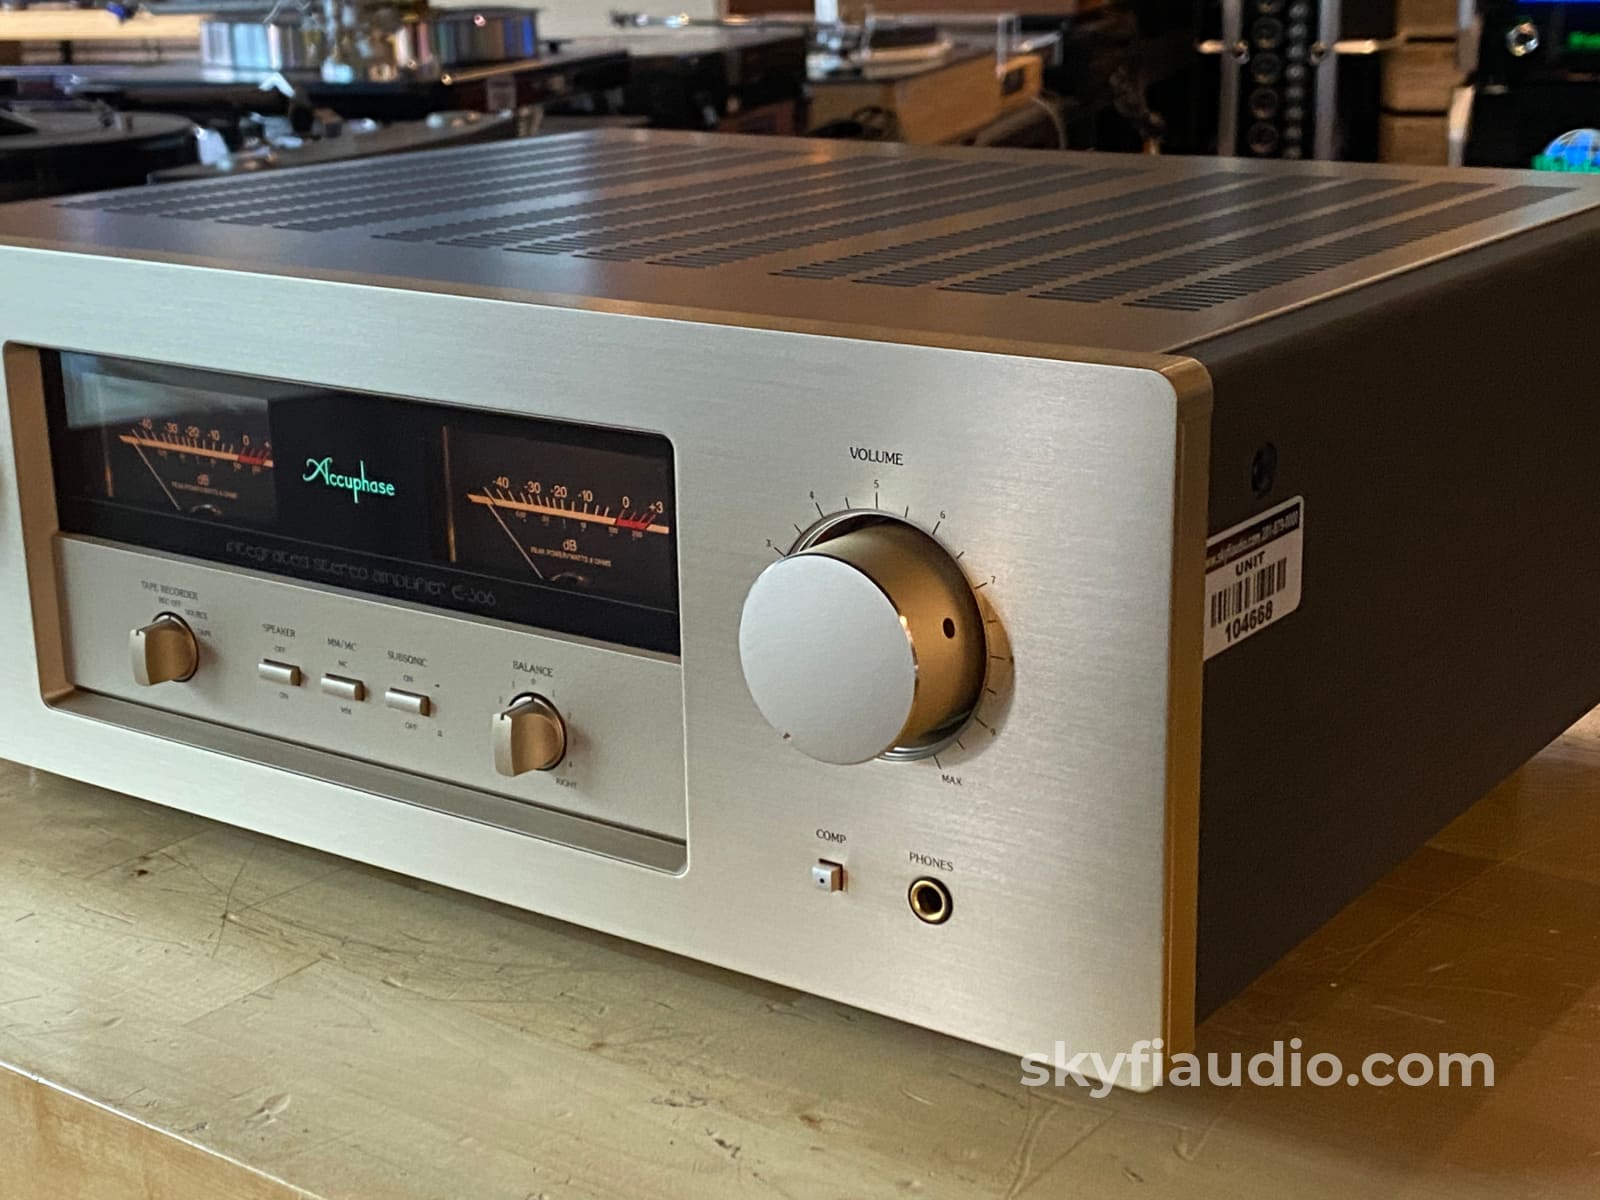 Accuphase E-306 Integrated Amplifier - 100 Wpc Made In Japan